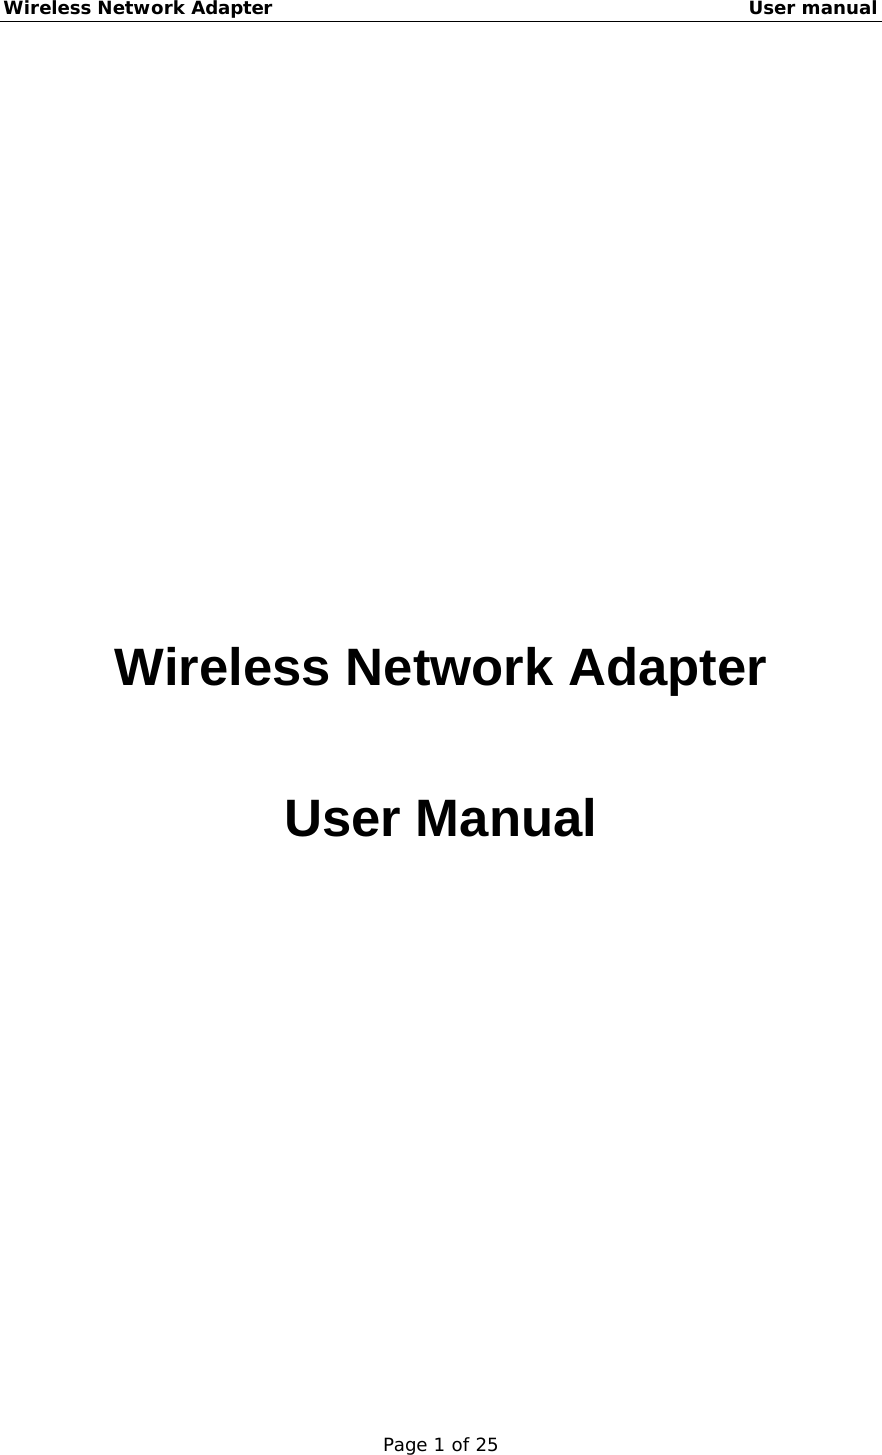 Wireless Network Adapter                                                    User manual Page 1 of 25                   Wireless Network Adapter  User Manual 